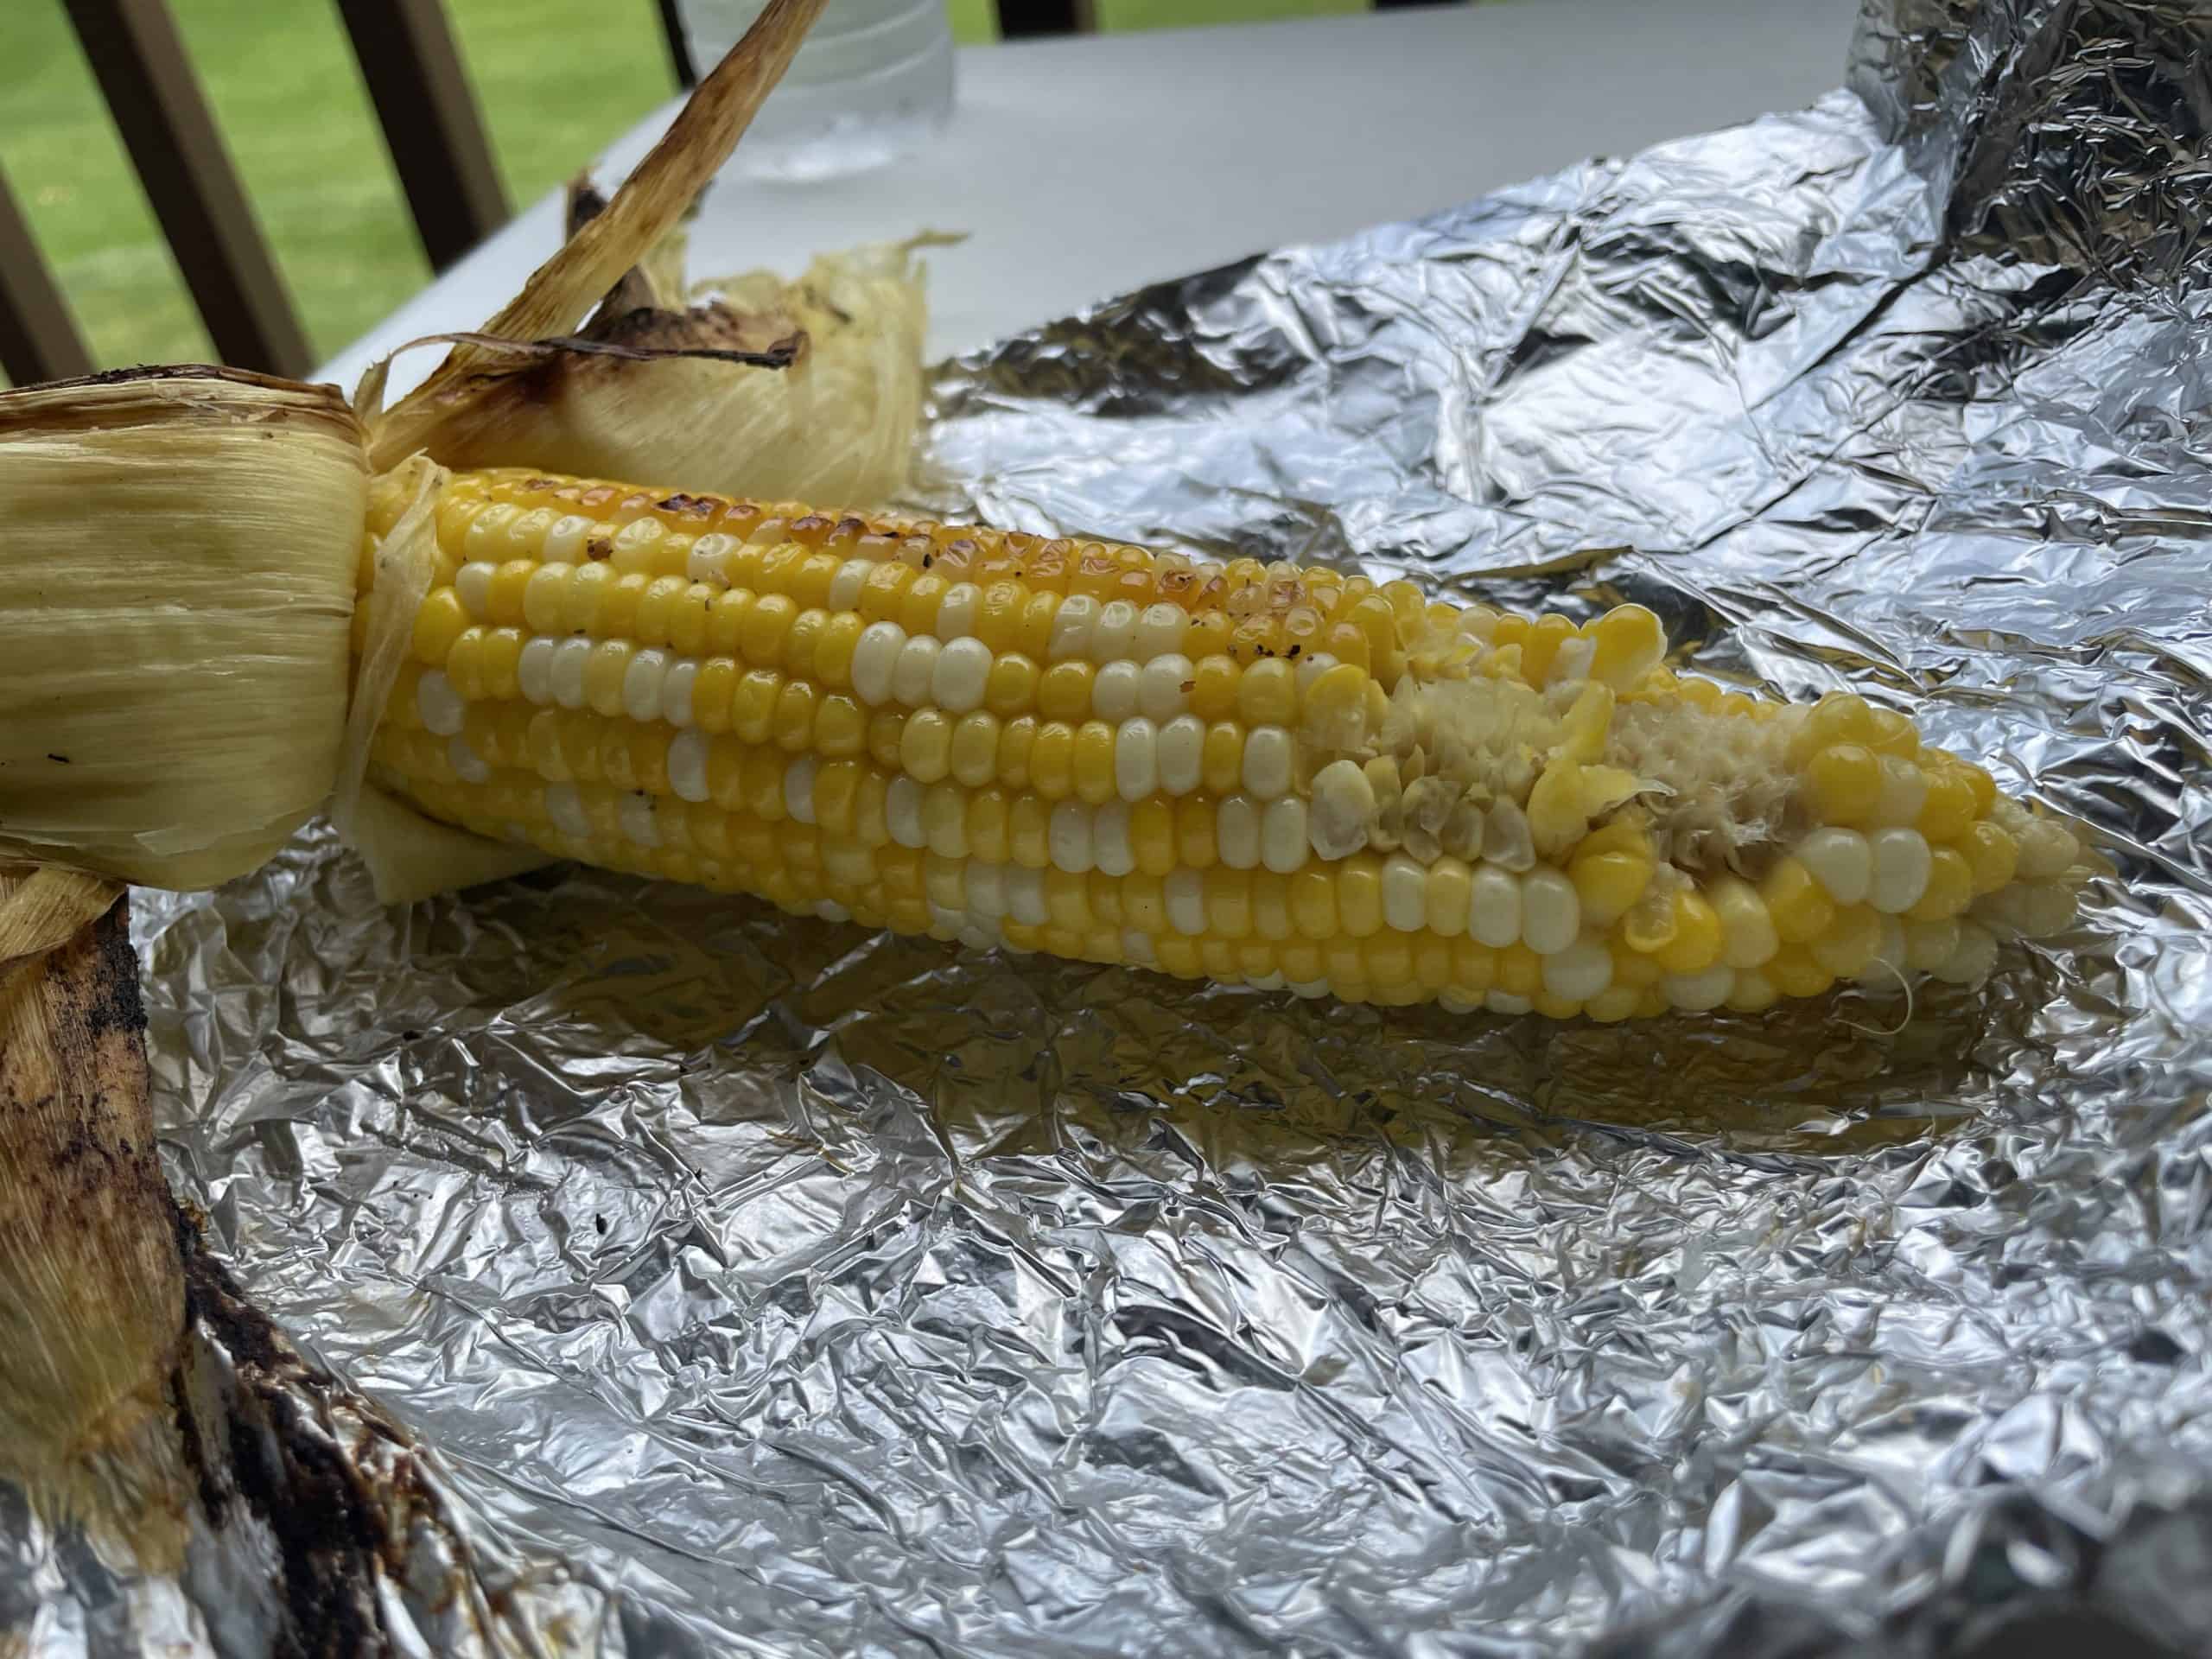 Blackstone Griddle Corn on the Cob with a few eaten kernels.